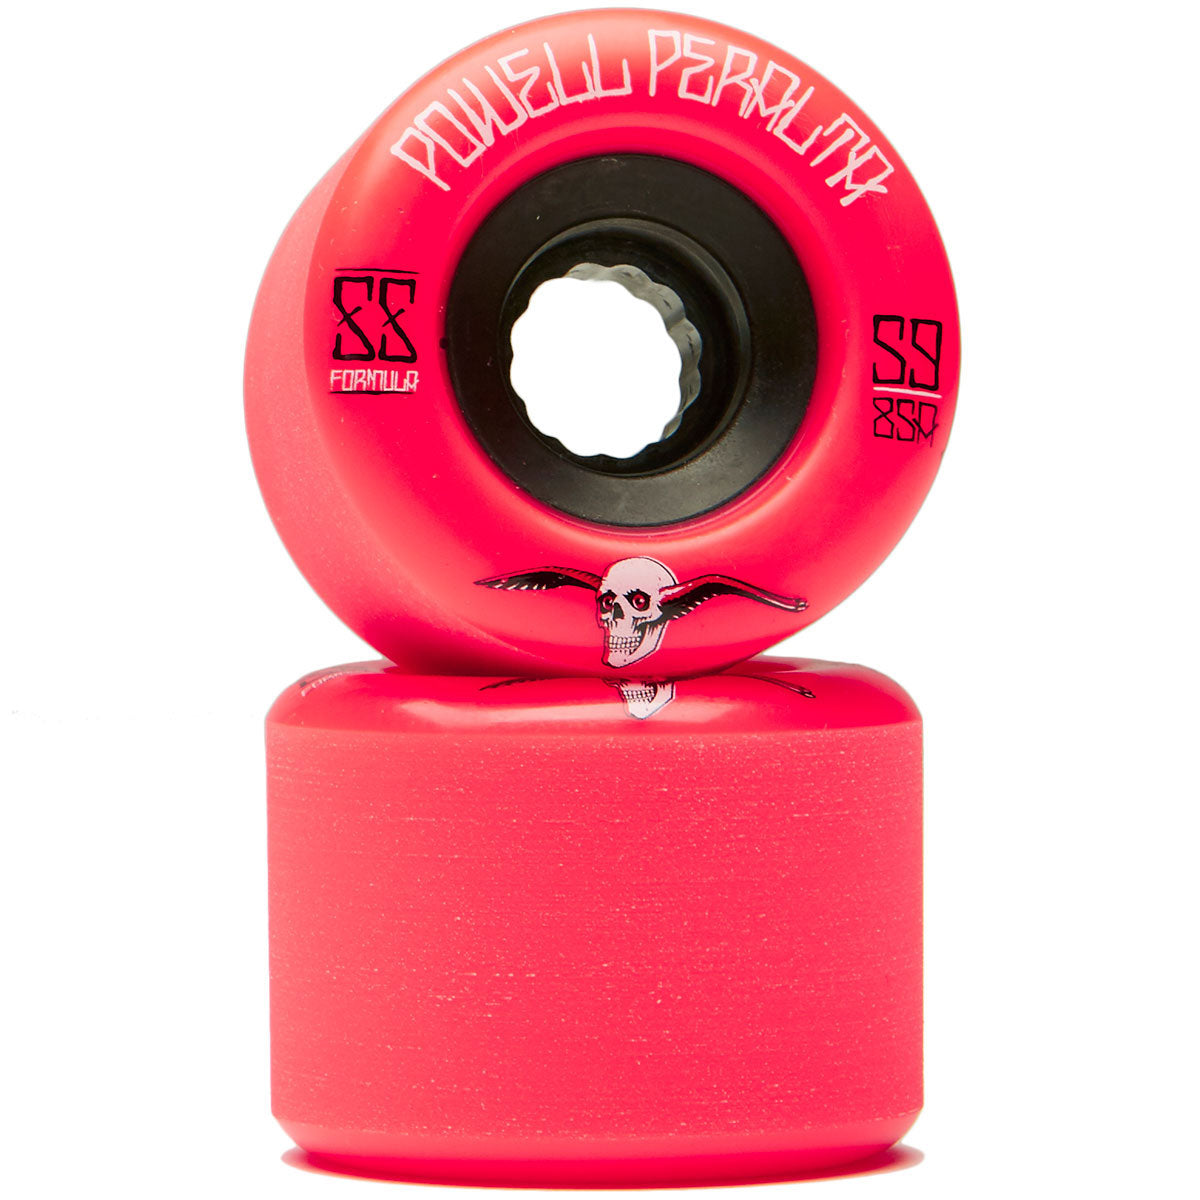 Powell-Peralta G-Slides 85A Longboard Wheels - Red - 59mm image 2